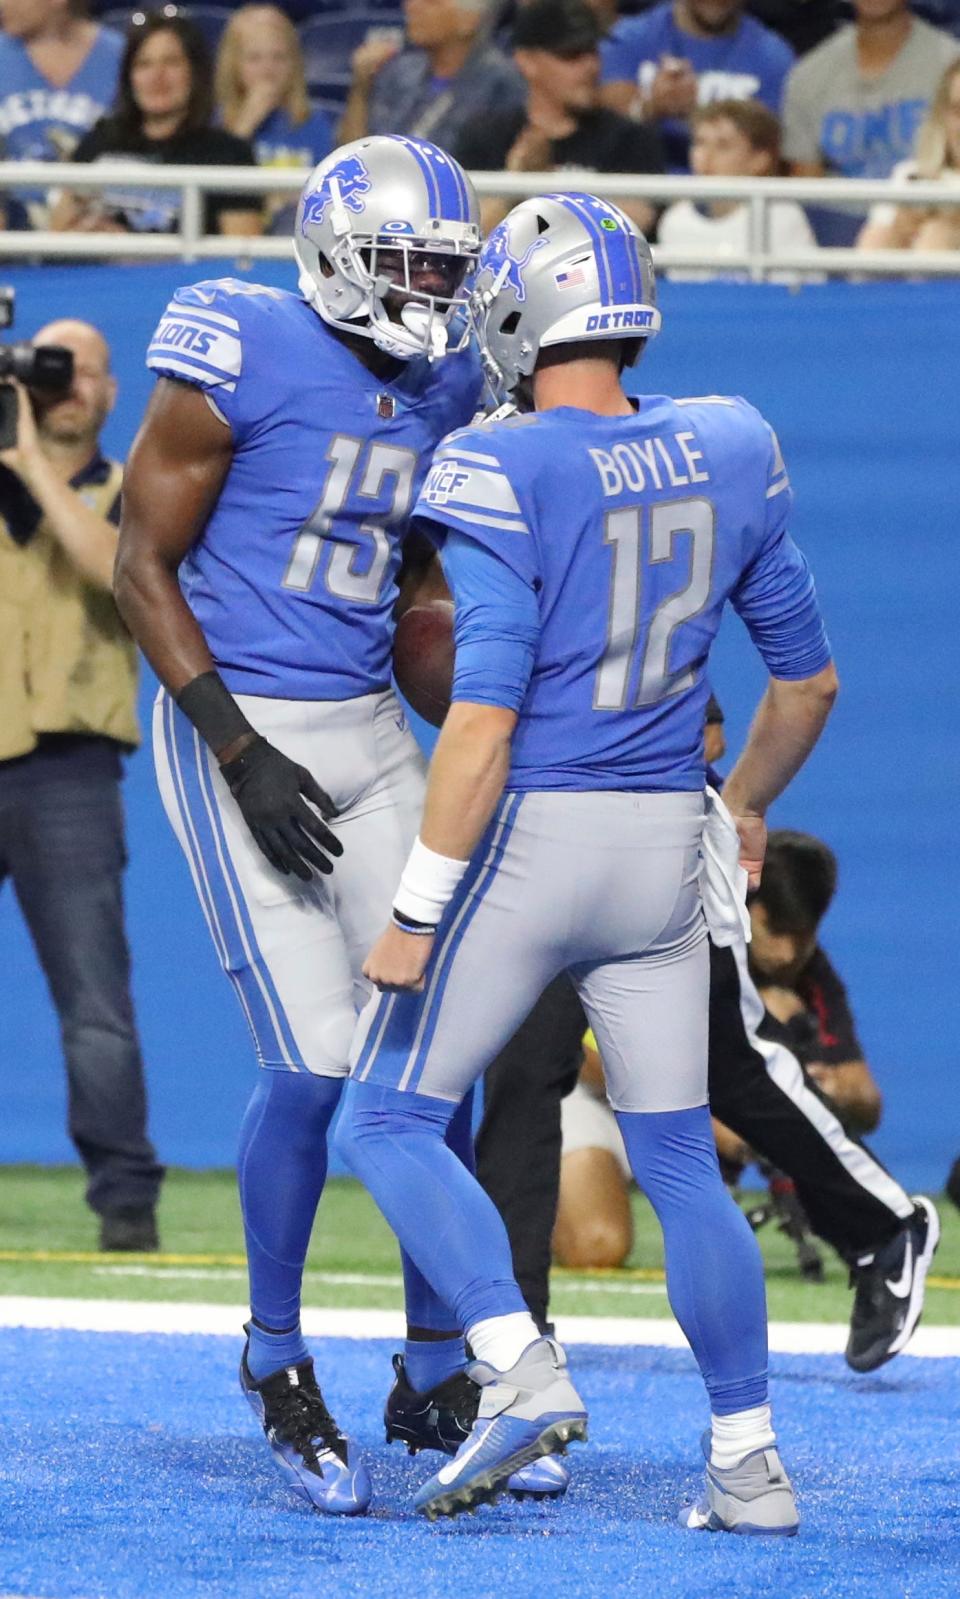 Lions tight end Devin Funchess celebrates his touchdown with quarterback Tim Boyle during the first half of the Lions' 27-23 preseason loss to the Falcons on Aug. 12.